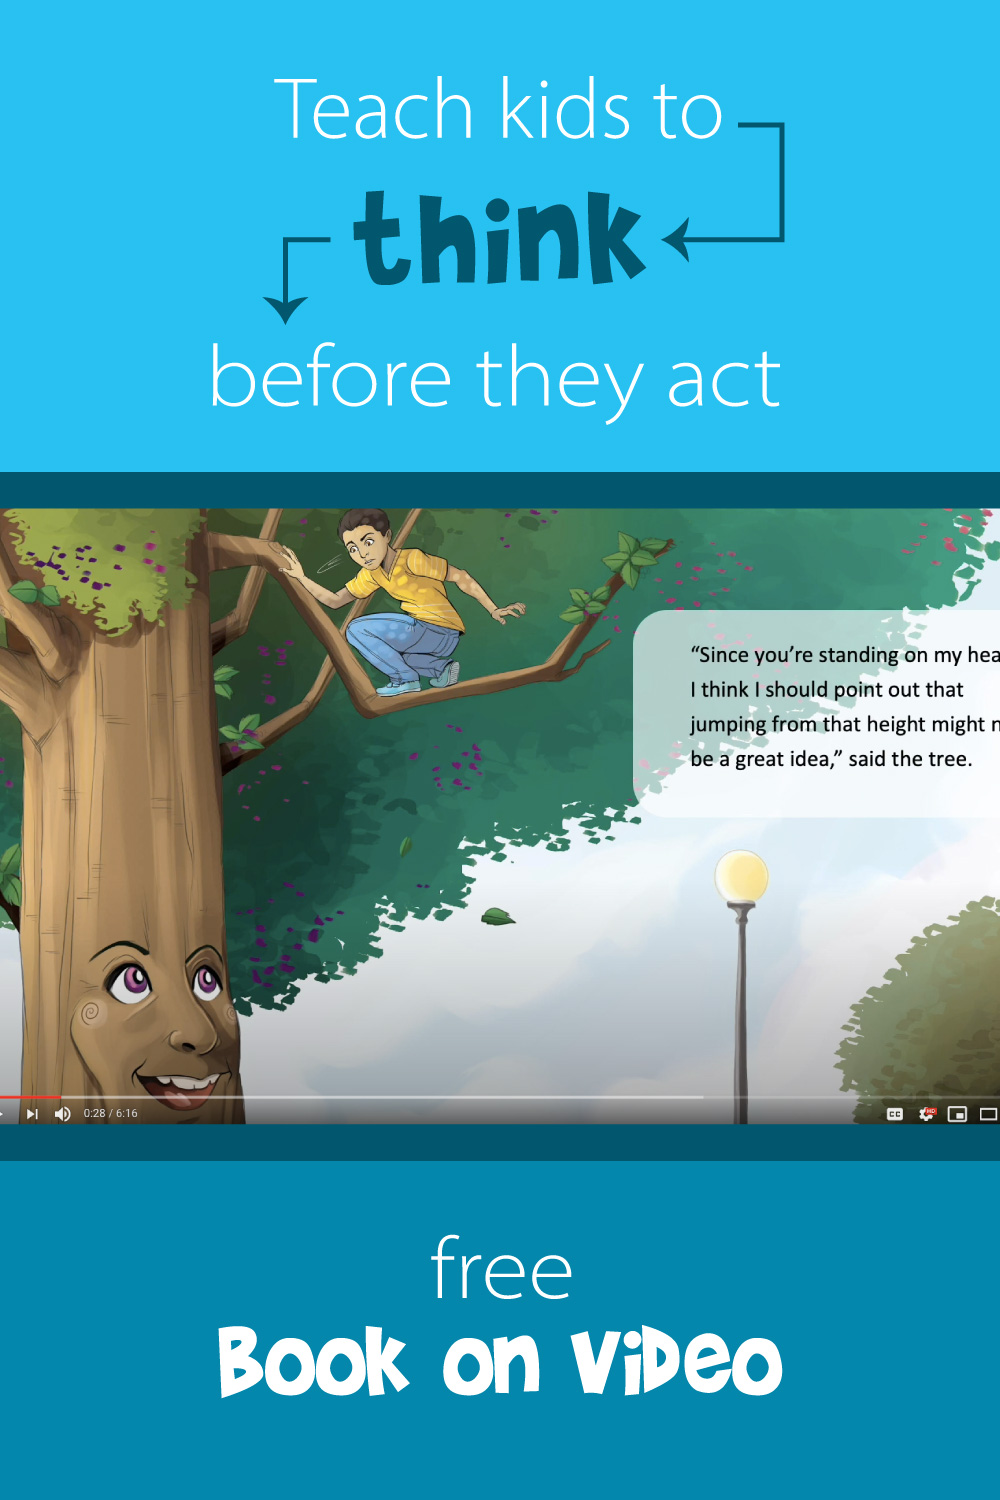 Free social emotional learning book on video- What if Talking with Trees